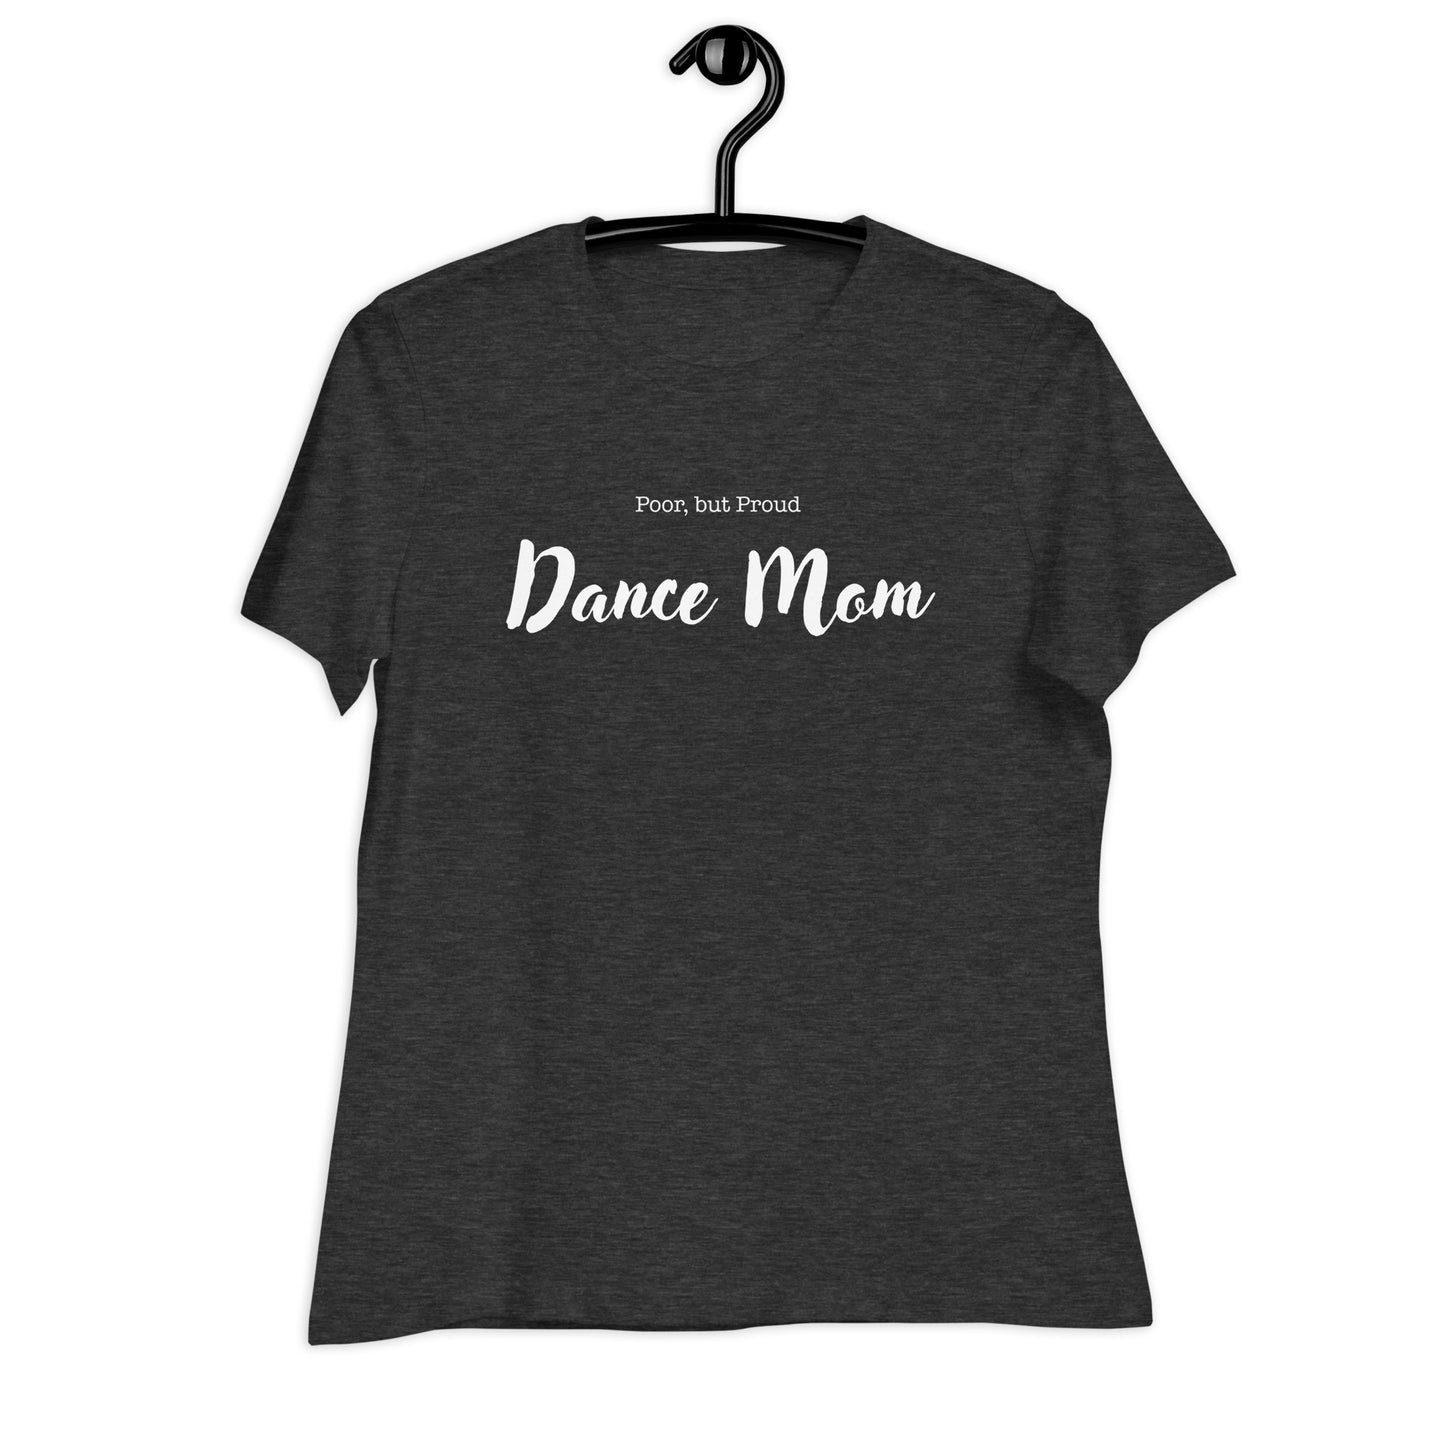 Poor but Proud Dance Mom Women's Relaxed Bella + Canvas T-Shirt